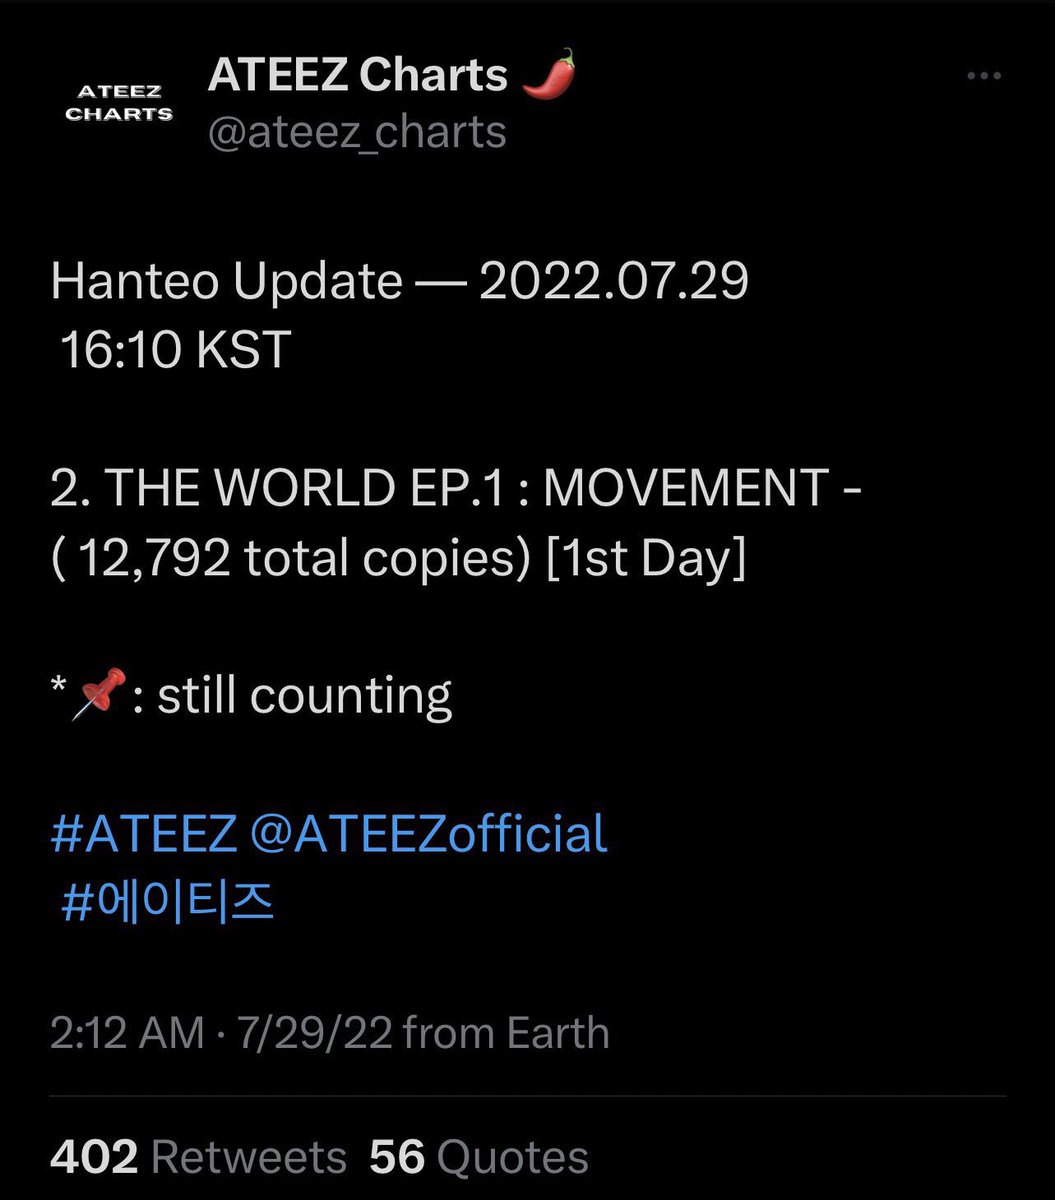 WE SURPASSED 100k ON HANTEO ALREADY OMFG ATINY LOOL ATE THAT DIFFERENCE!!!

MY ATEEZ 😭😭😭😭😭